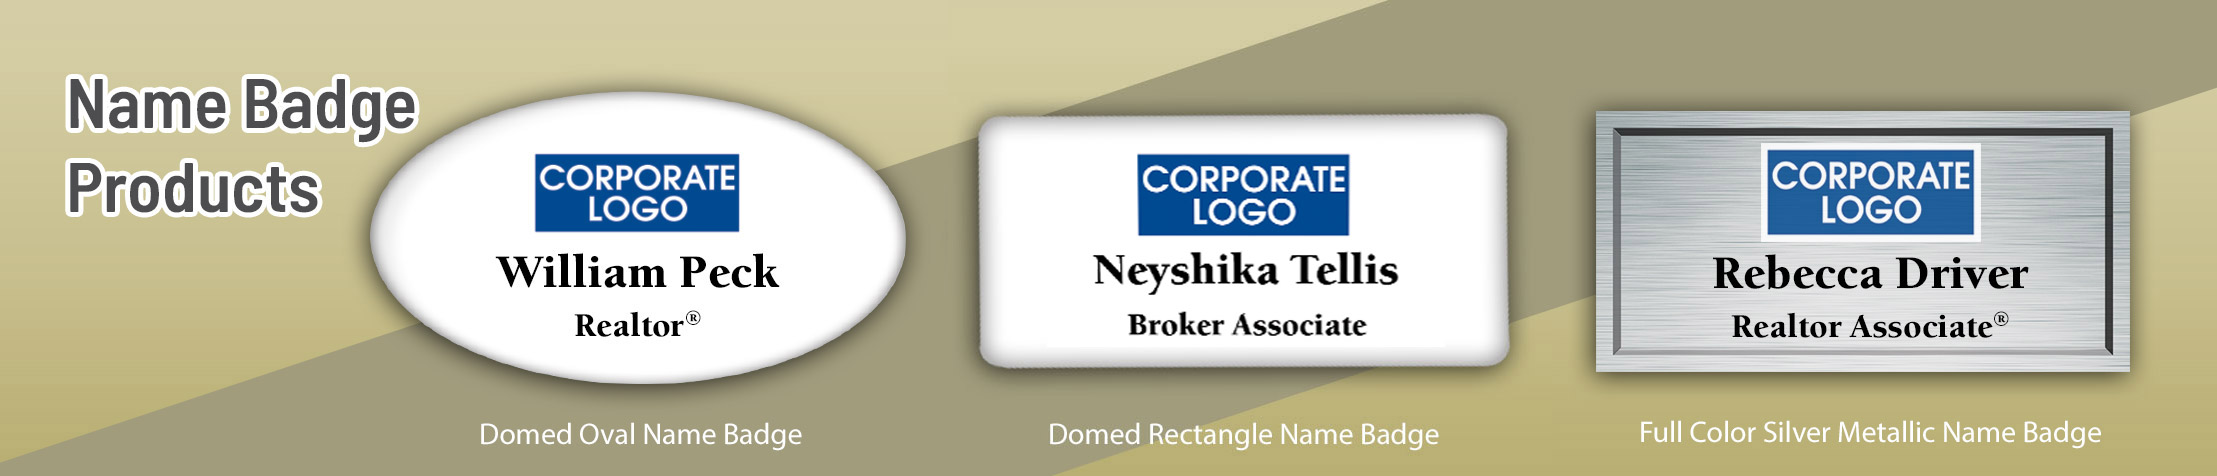 Coldwell Banker Real Estate Name Badge Products - CB Name Tags for Realtors | Sparkprint.com